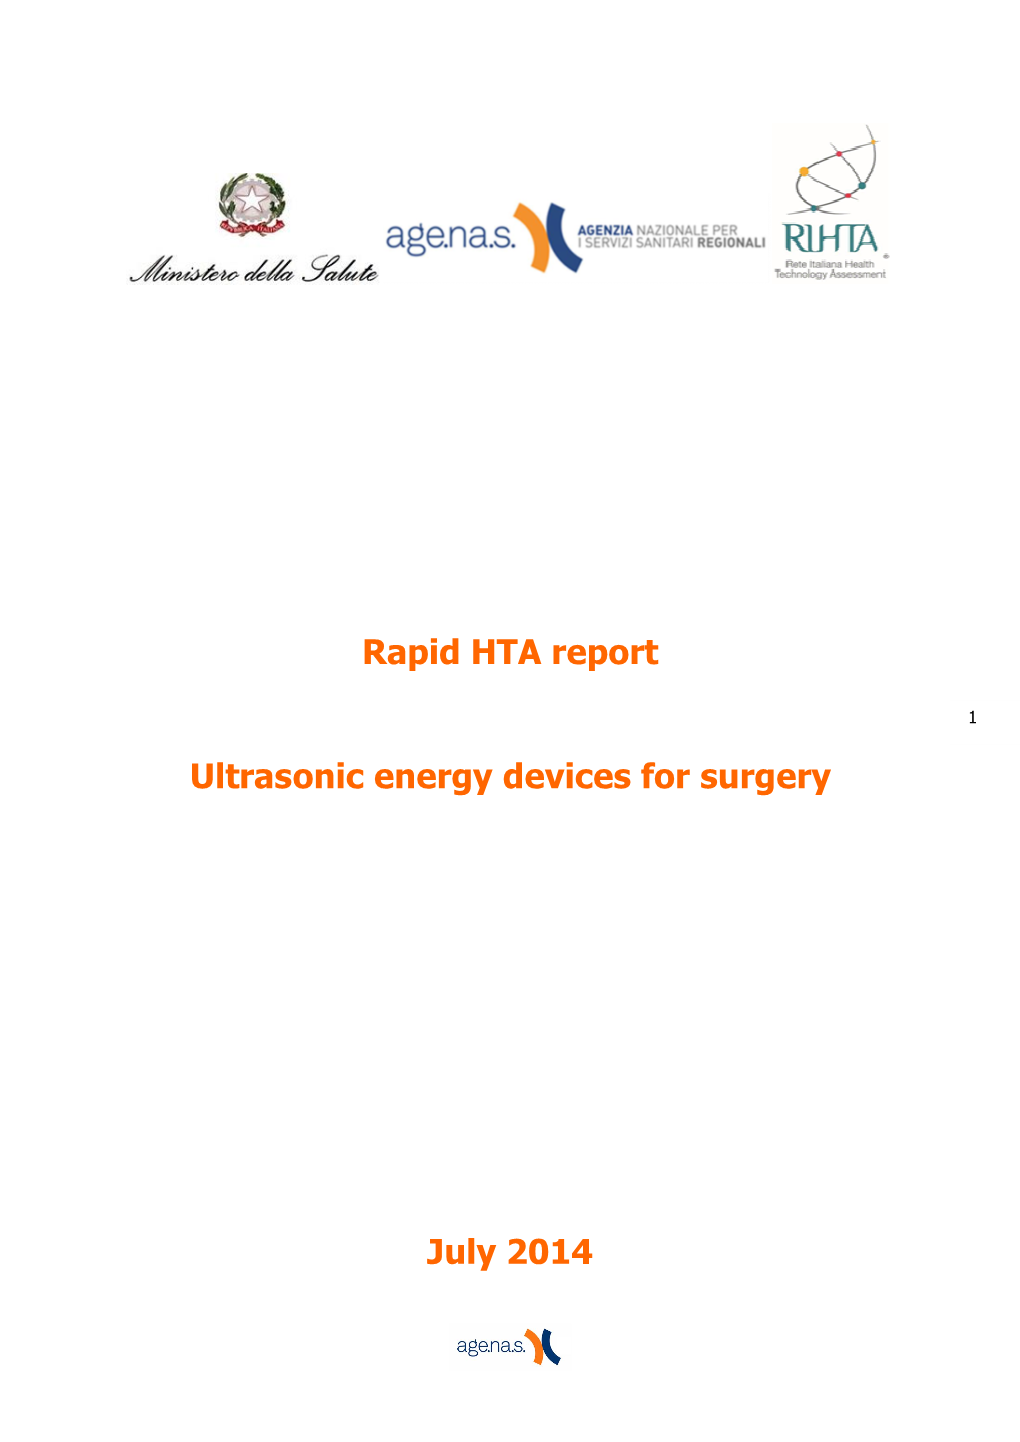 Rapid HTA Report Ultrasonic Energy Devices for Surgery July 2014